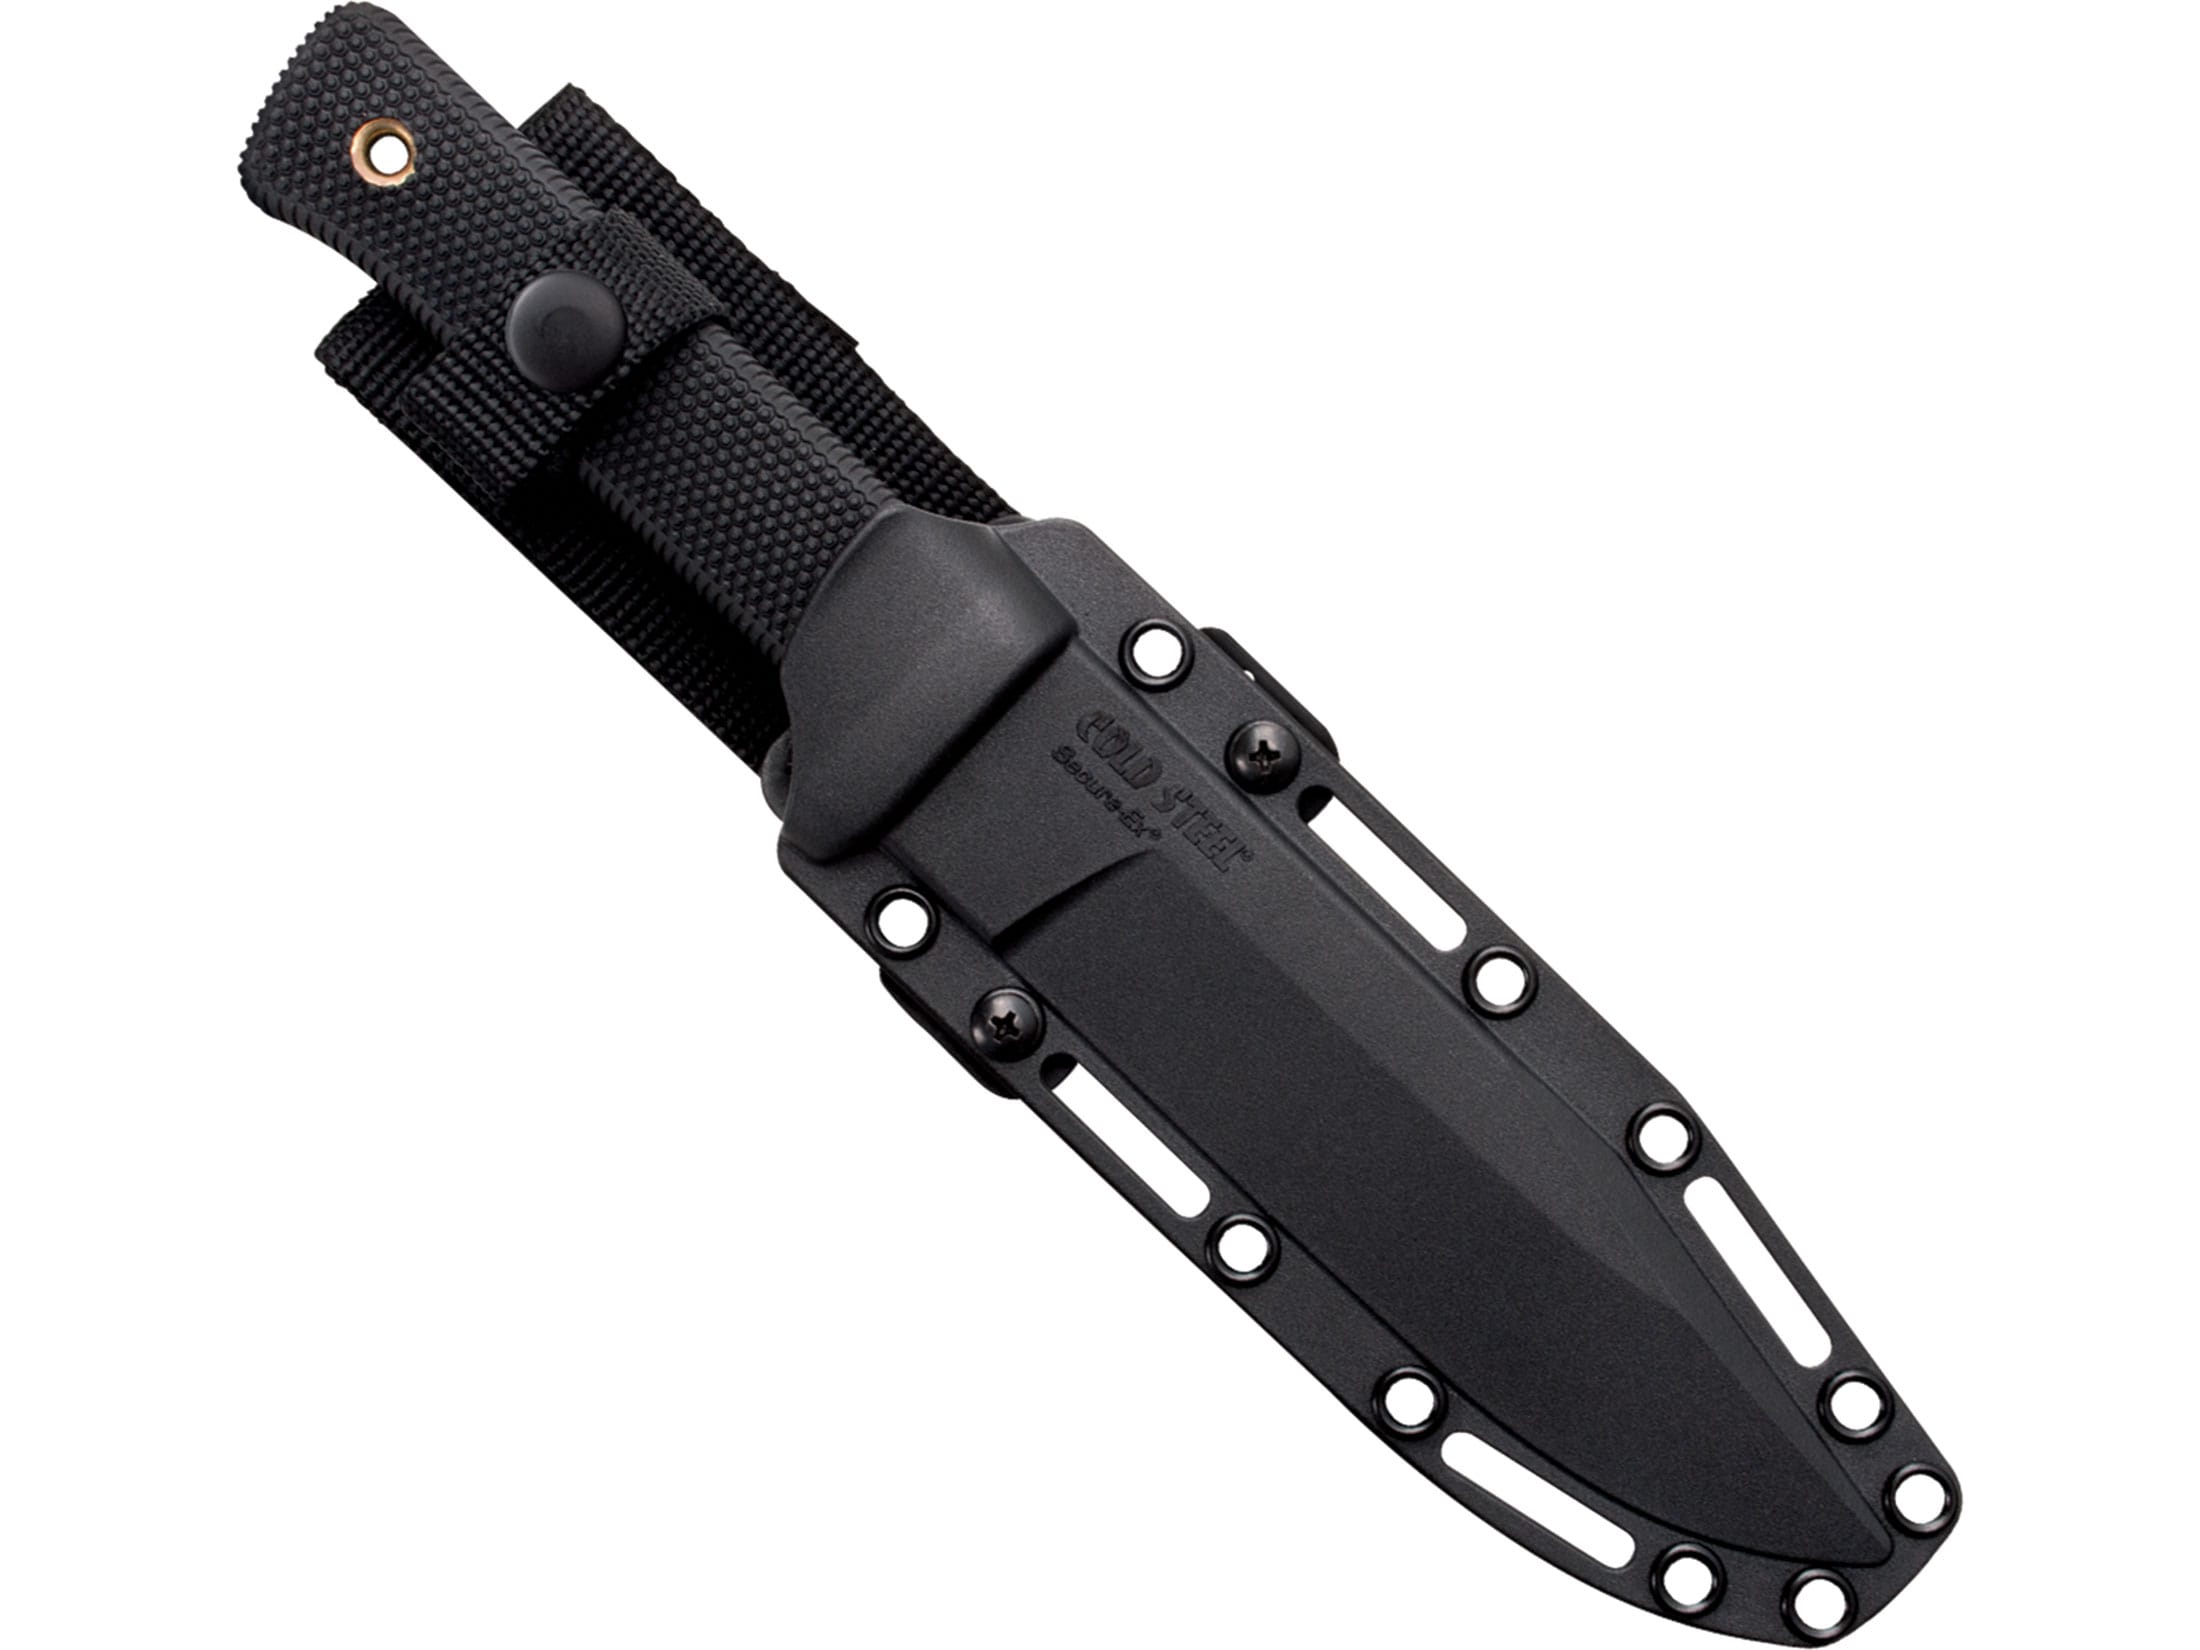  Cold Steel SRK-C Survival Rescue Fixed Blade Knife with  Secure-Ex Sheath - Standard Issue Knife of the Navy Seals, Great for  Tactical, Outdoors, Hunting and Survival Applications, SK-5 Steel, Compact 